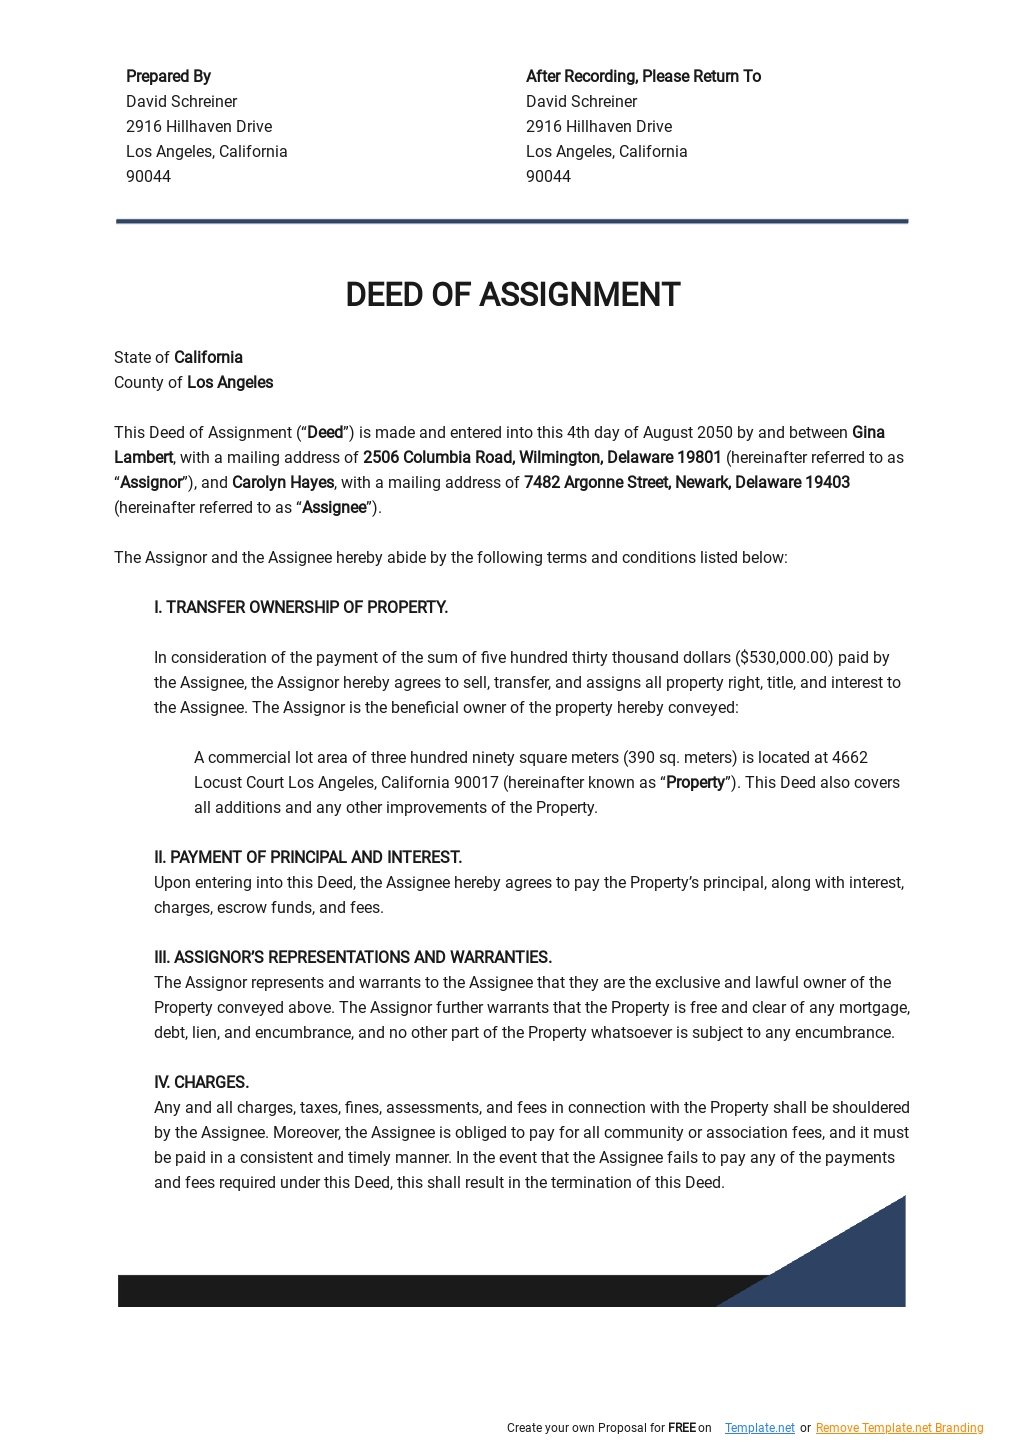 deed of assignment document